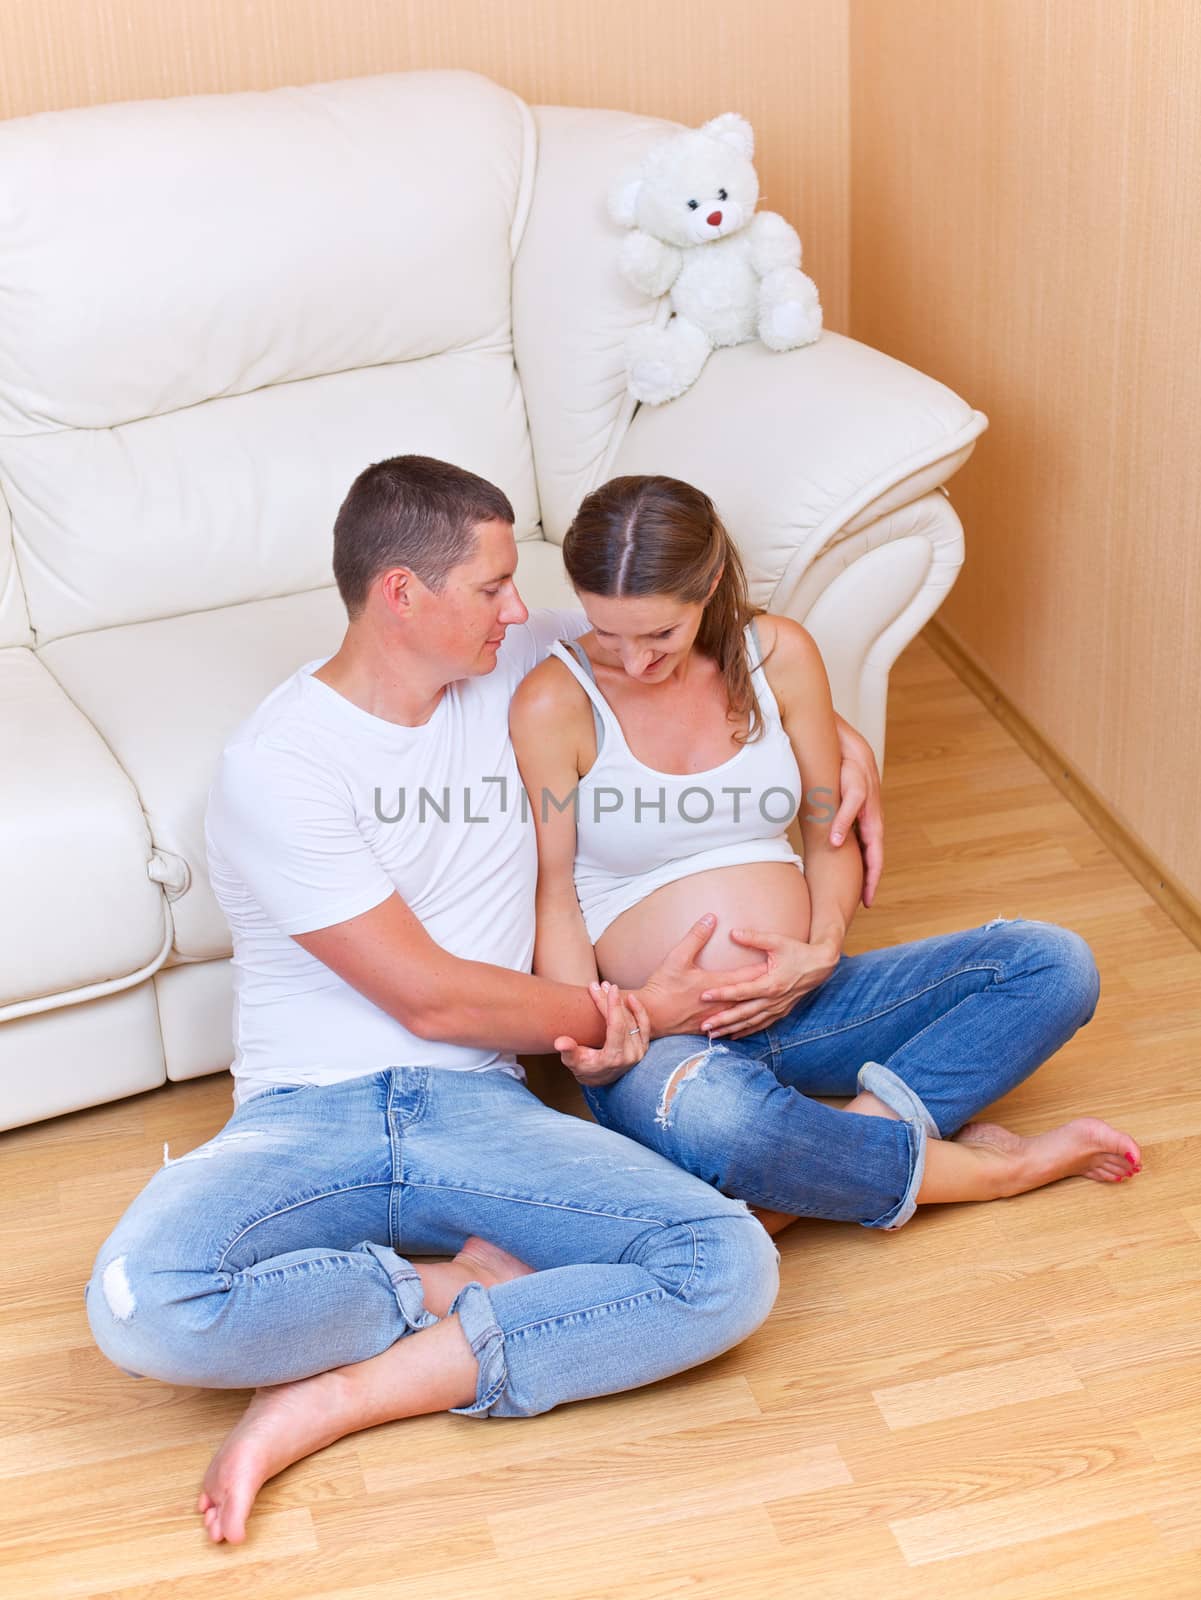 Couple sitting near a sofa and smiling and pending the kid